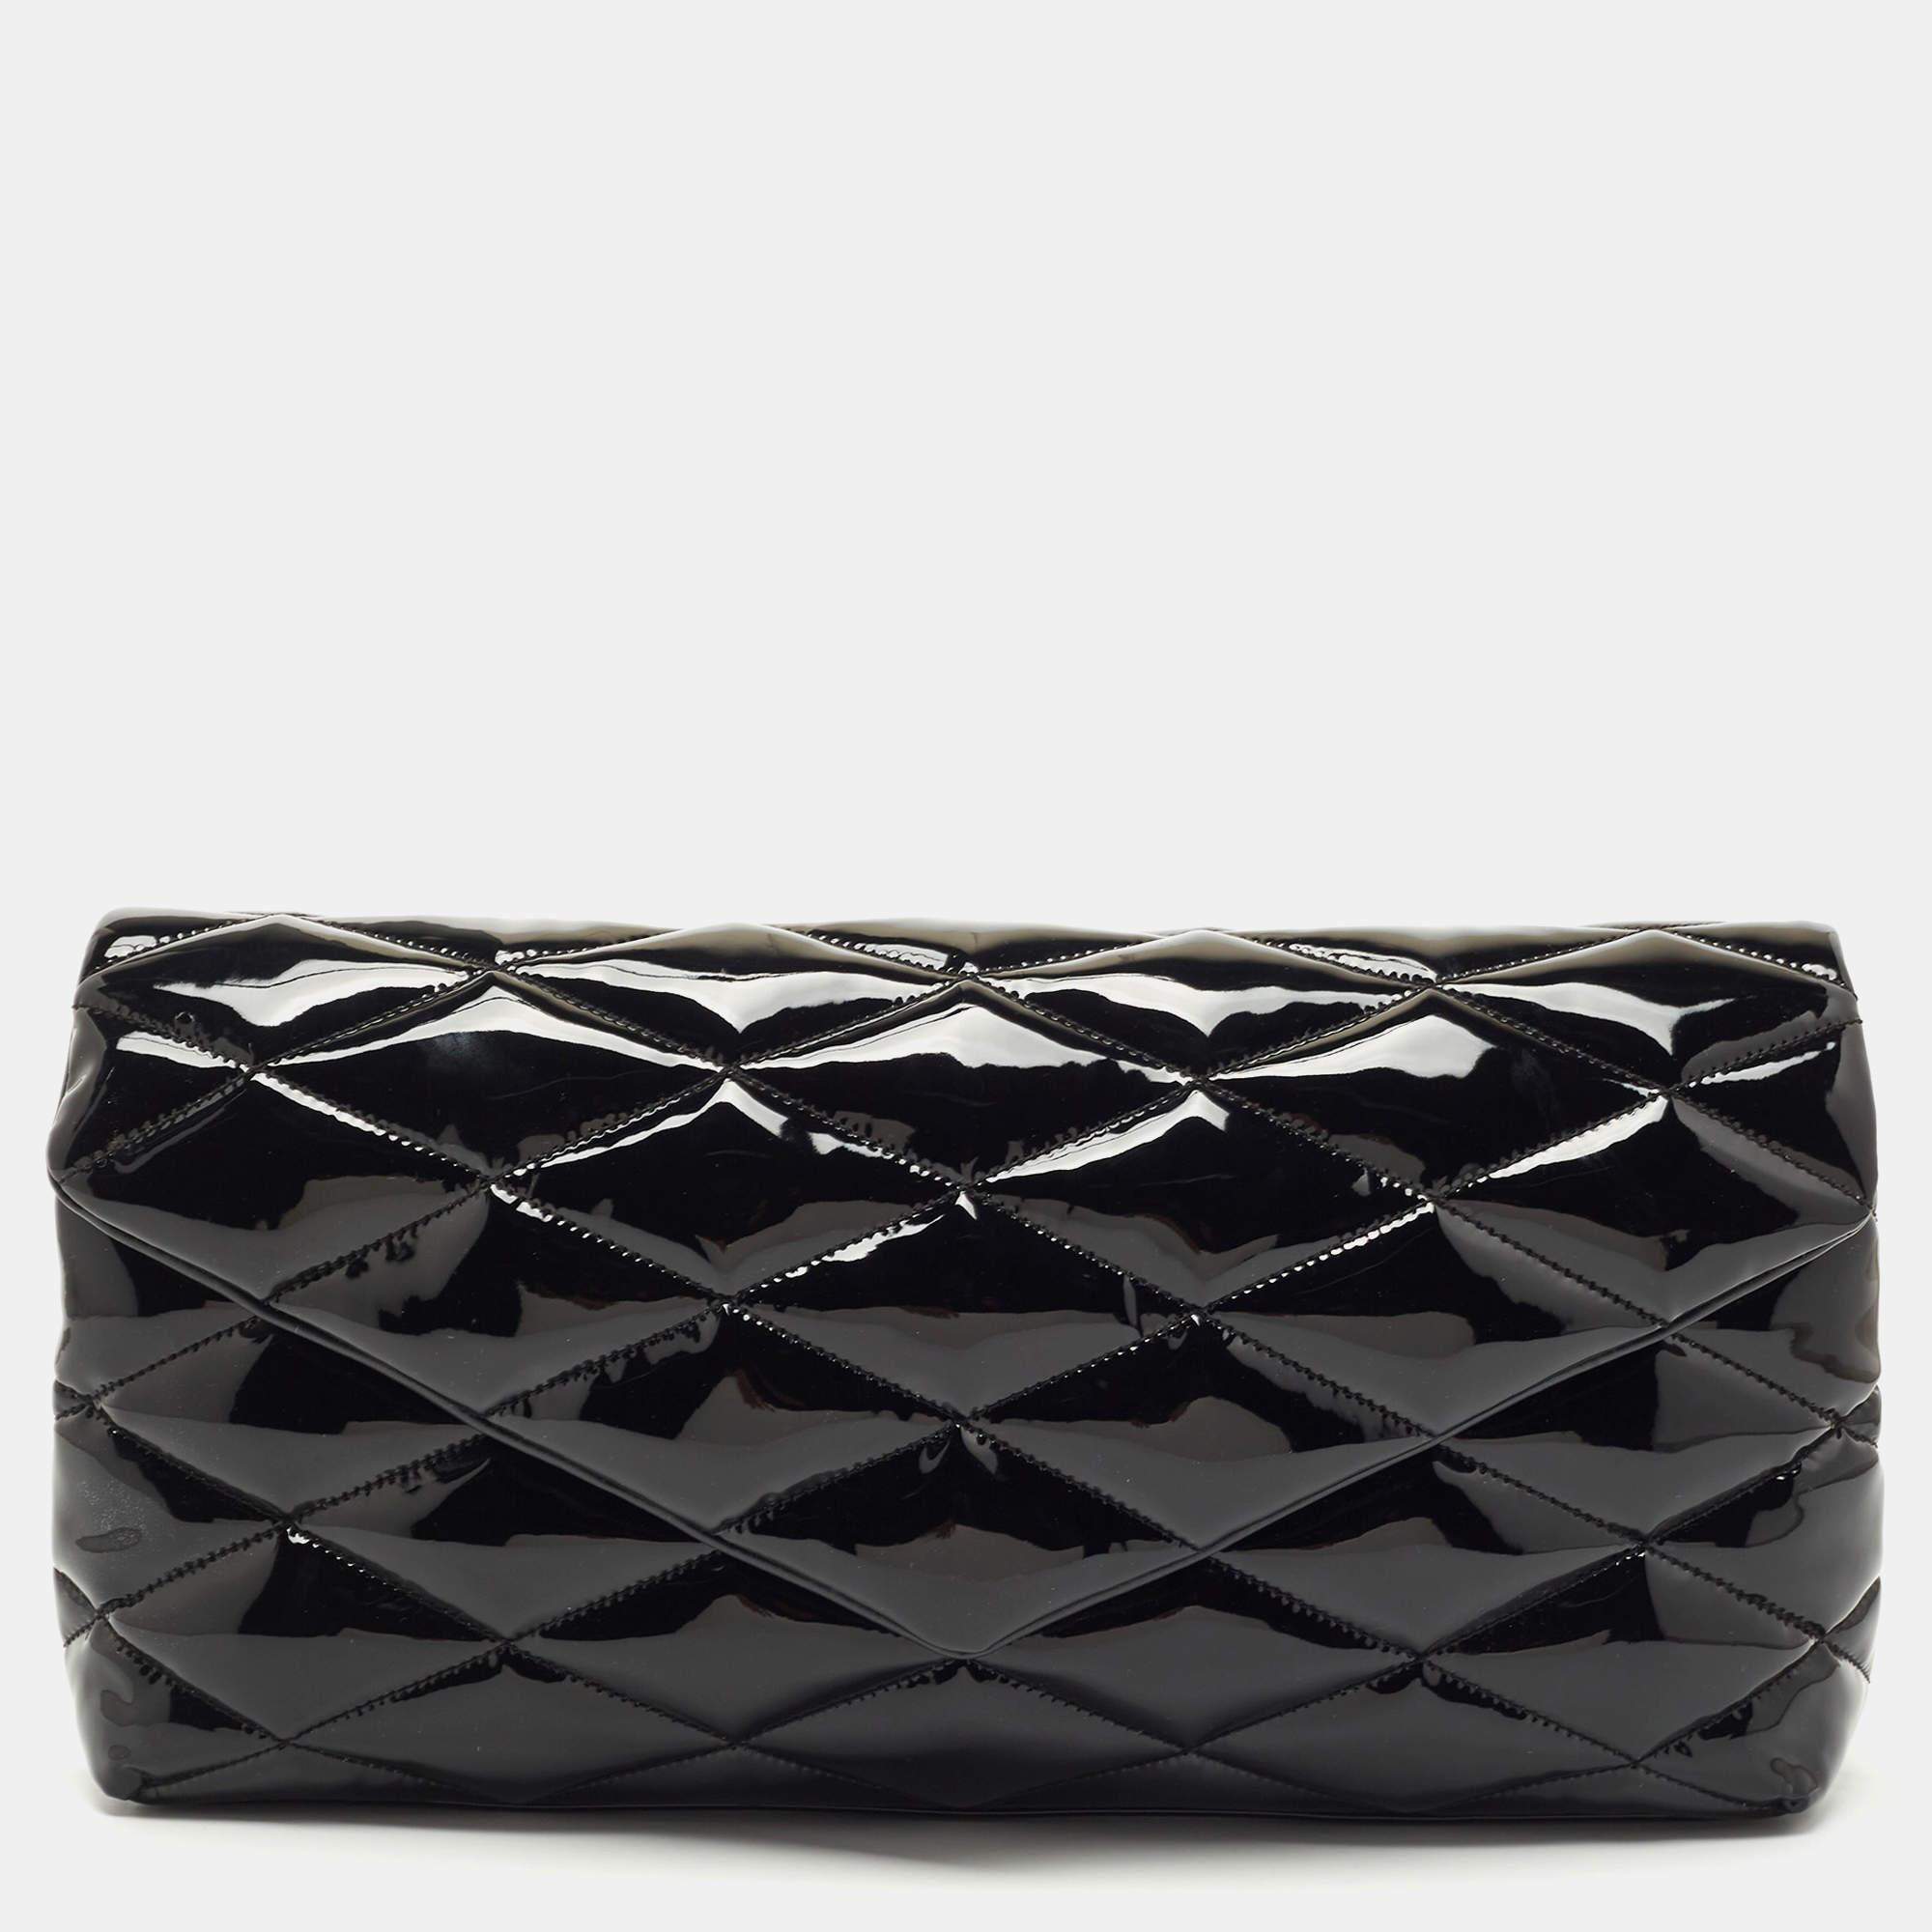 Functional and fashionable, this clutch is a classy styling choice. It is crafted from quality materials, and its lined interior will keep your evening essentials in a neat way.

Includes: Original Dustbag